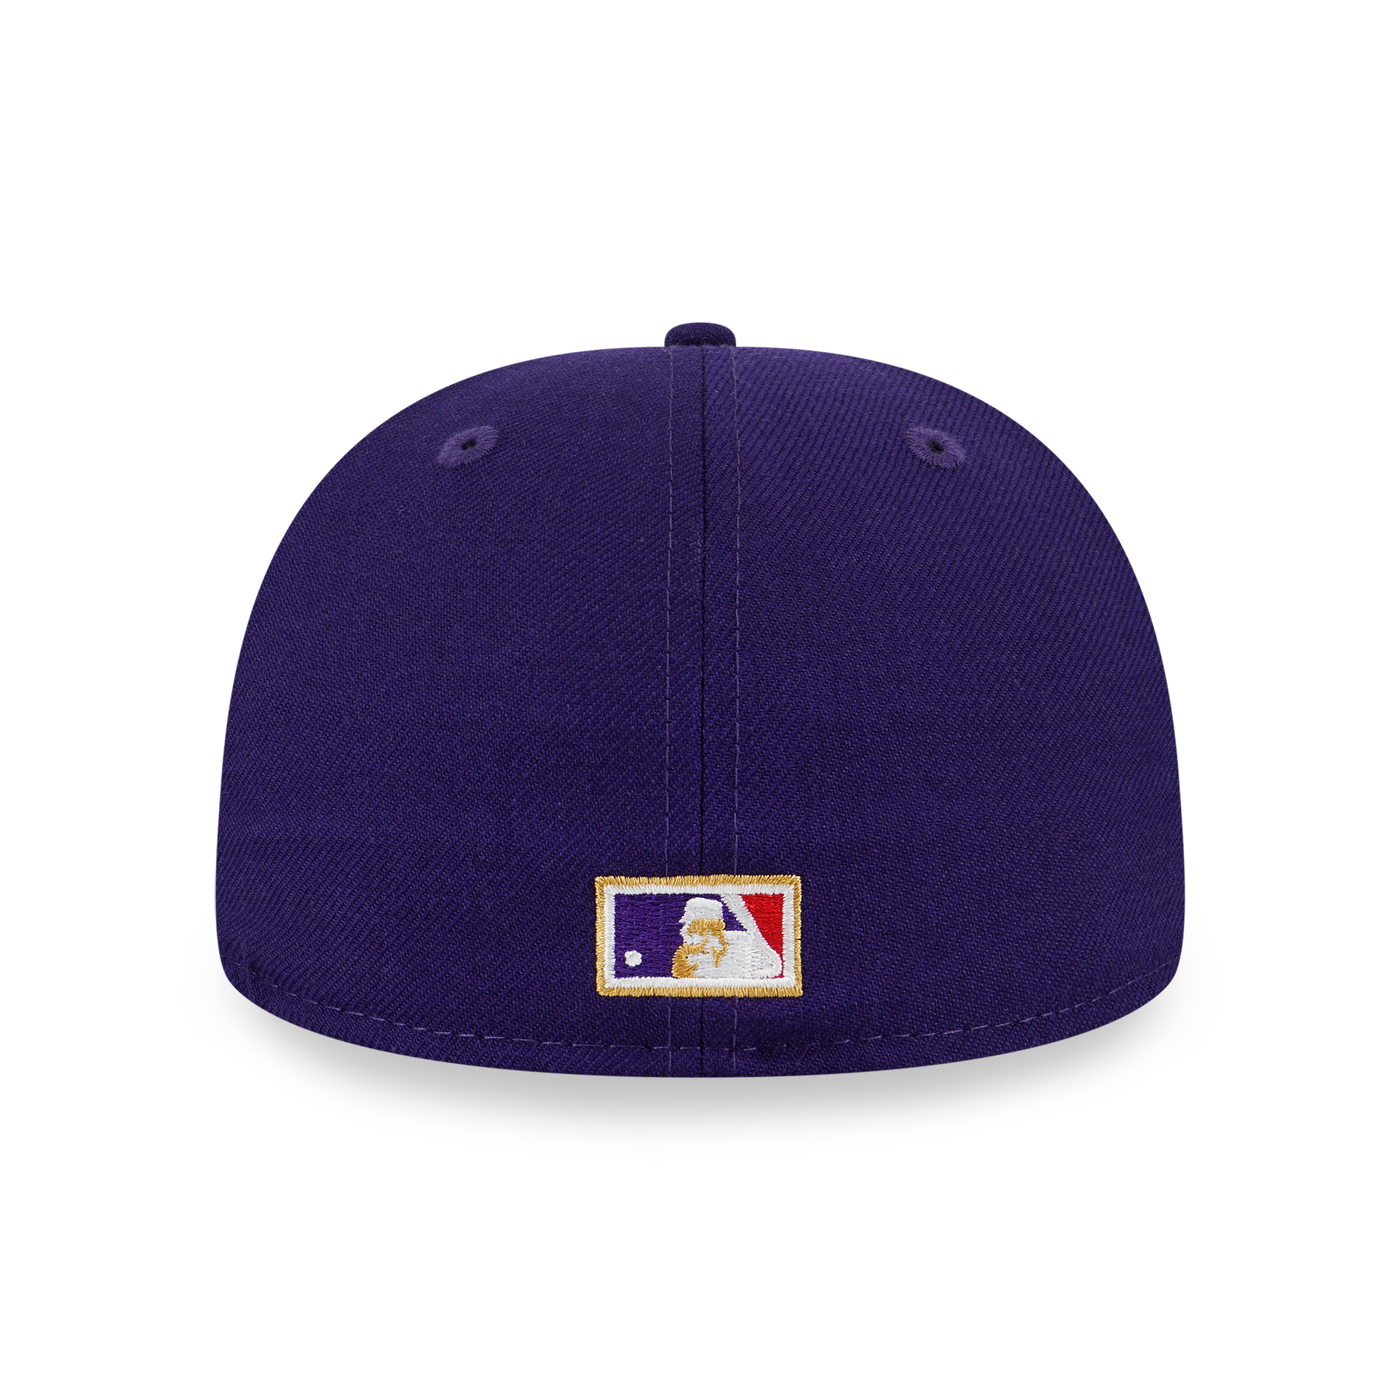 LOS ANGELES DODGERS COOPERSTOWN ROYAL PURPLE 59FIFTY CAP